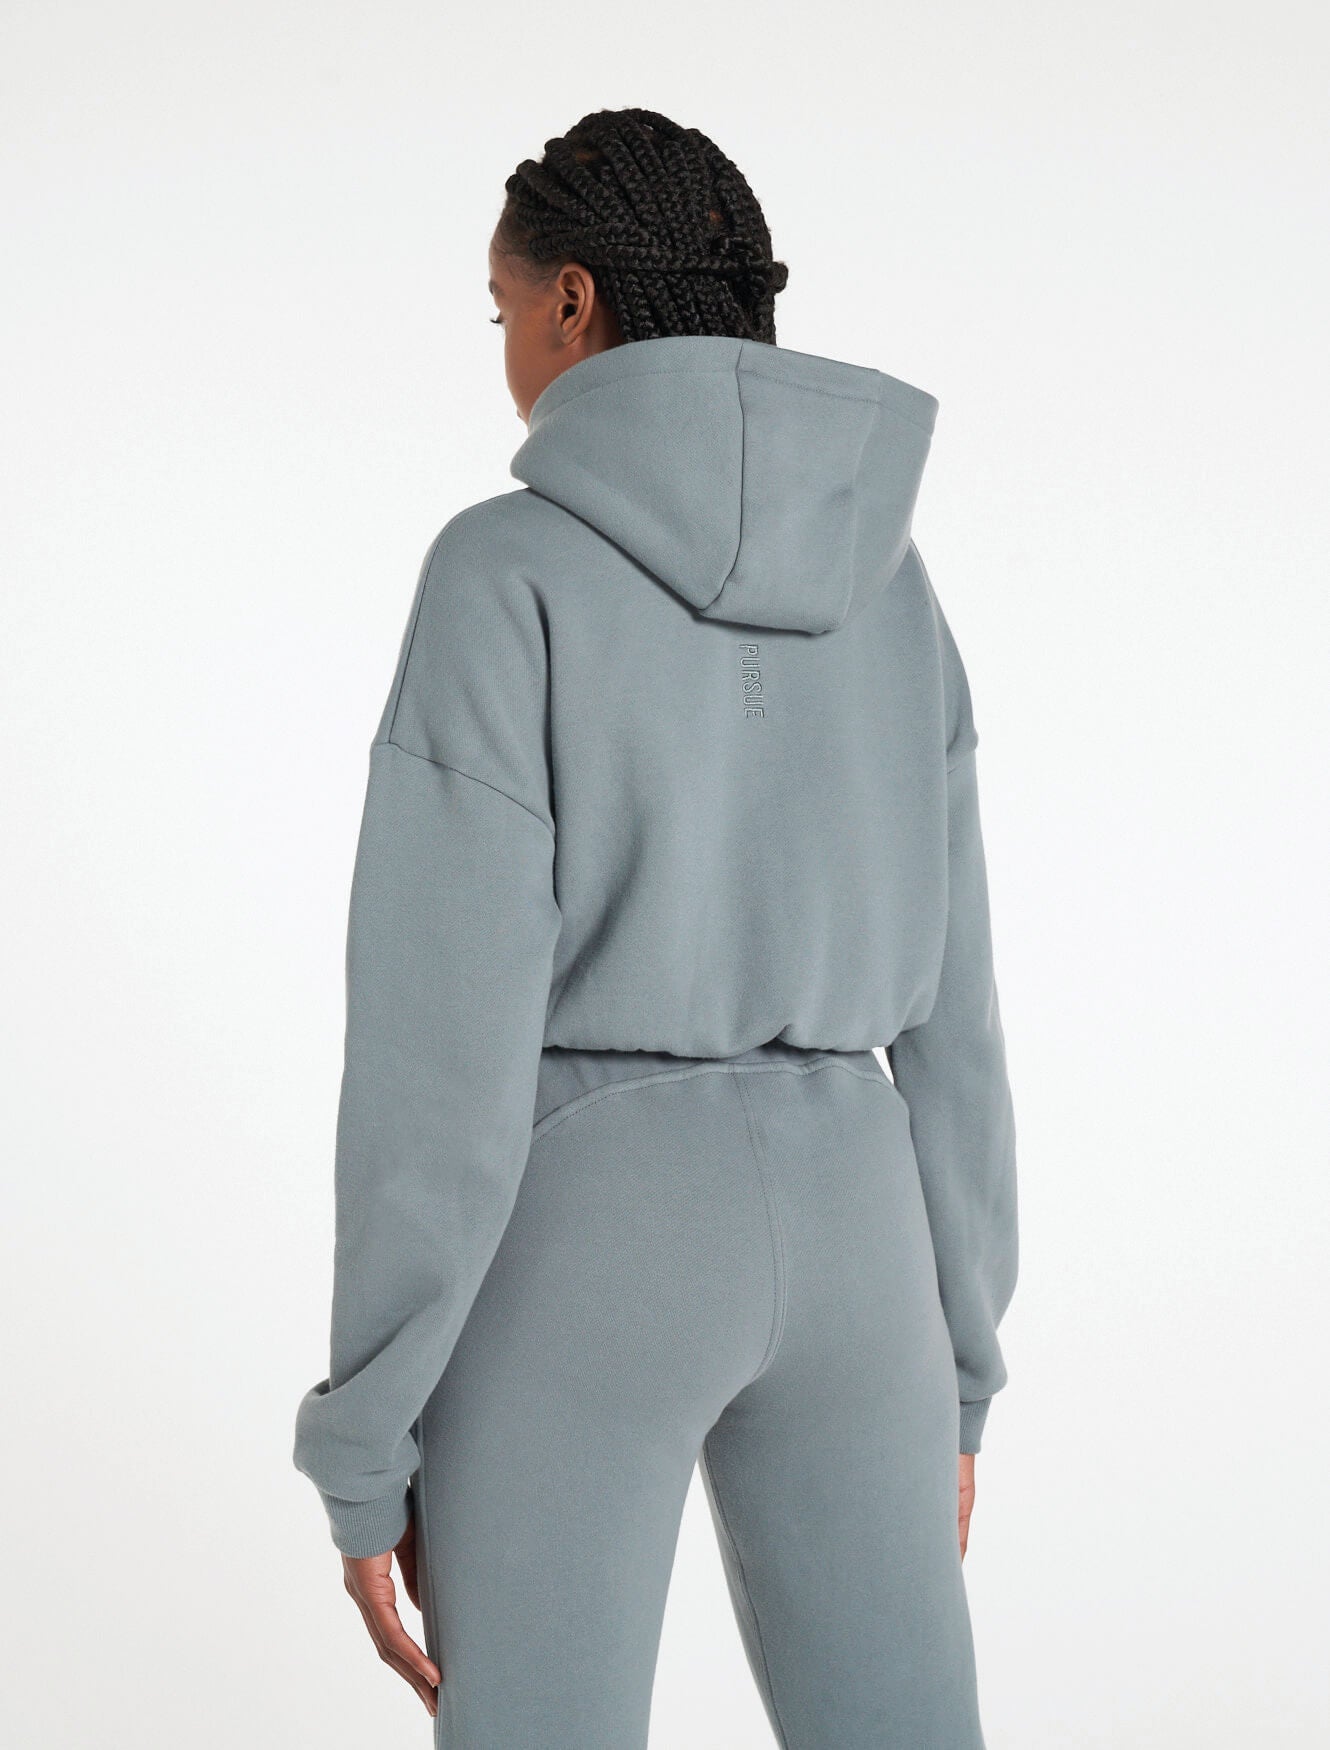 Select Crop Jacket / Teal Pursue Fitness 4